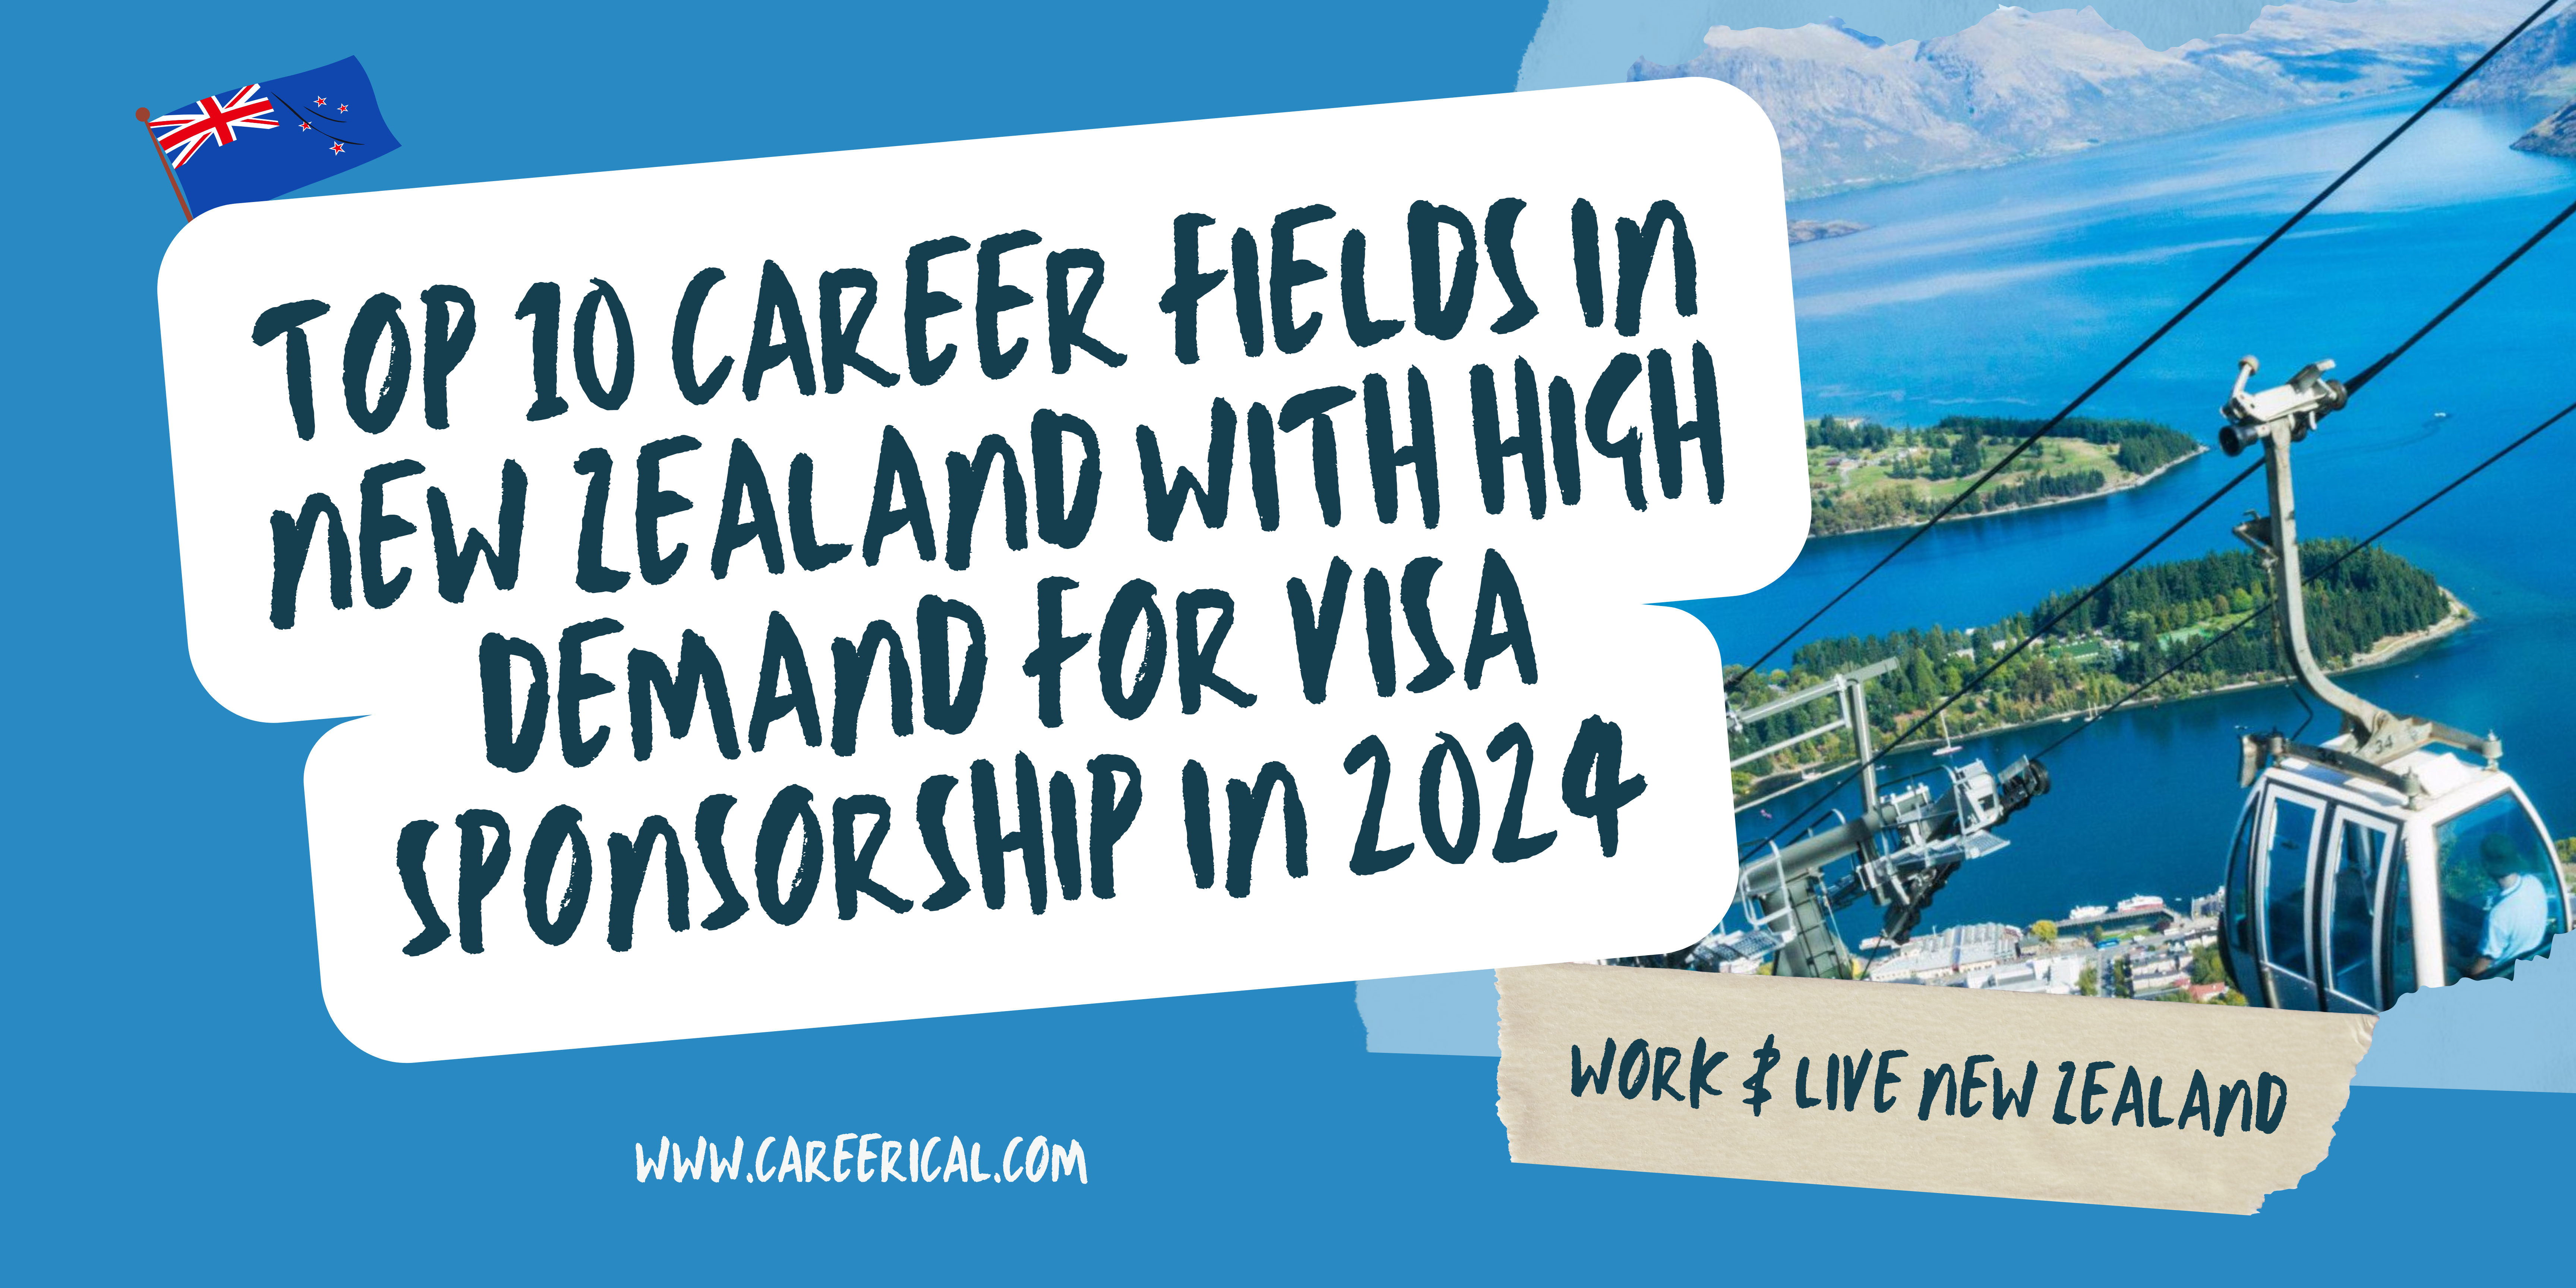 Top 10 Career Fields in New Zealand with High Demand for Visa Sponsorship in 2024